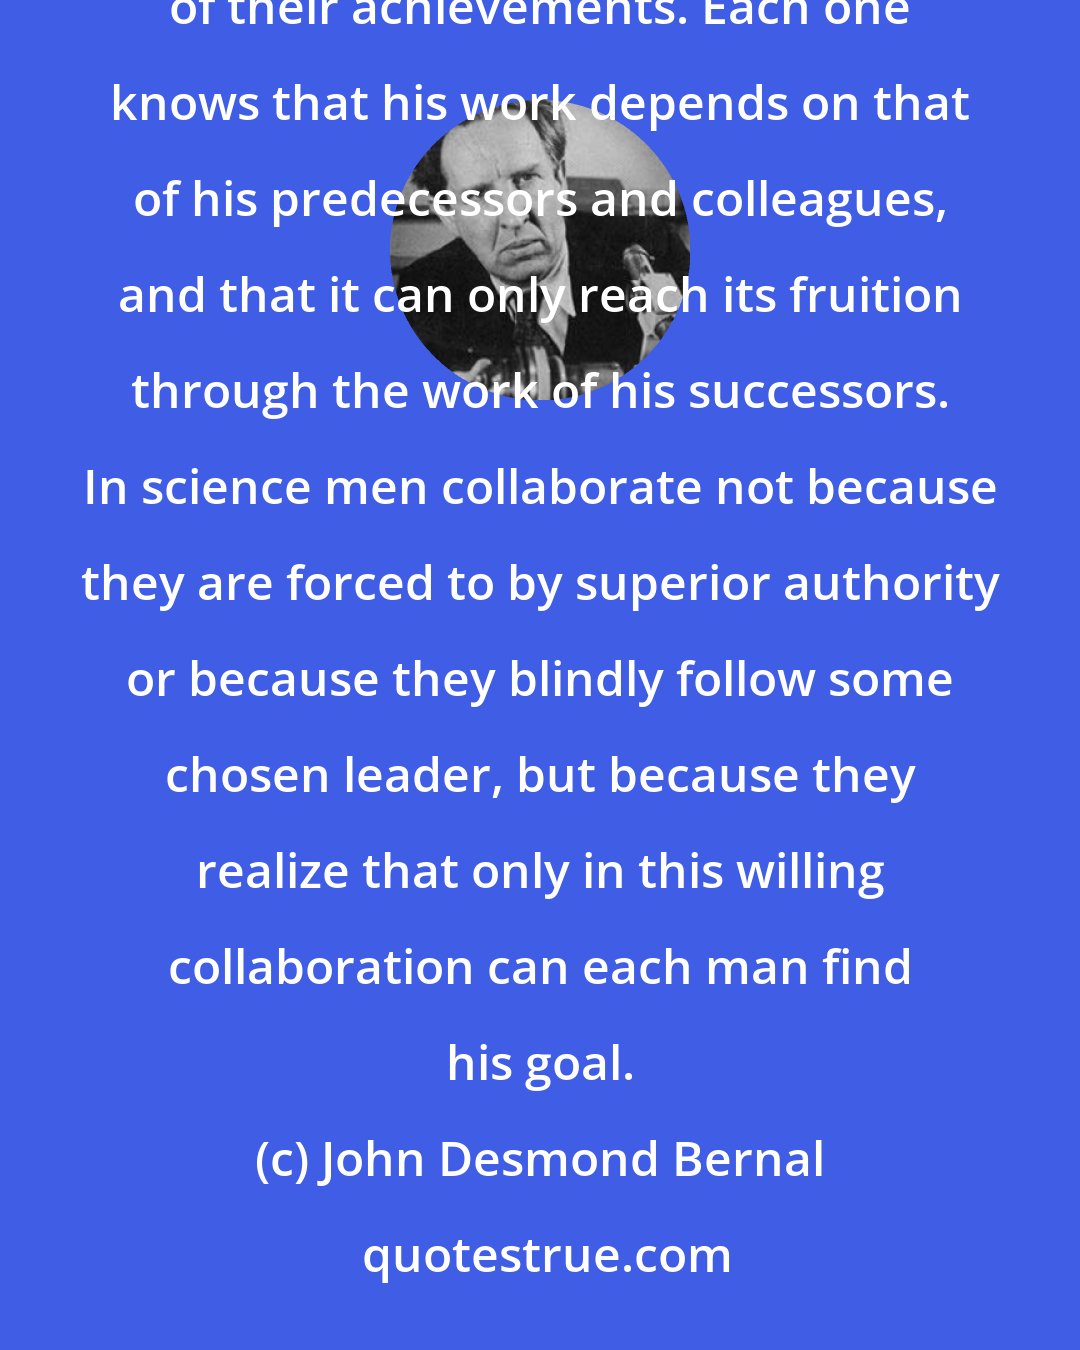 John Desmond Bernal: In science men have learned consciously to subordinate themselves to a common purpose without losing the individuality of their achievements. Each one knows that his work depends on that of his predecessors and colleagues, and that it can only reach its fruition through the work of his successors. In science men collaborate not because they are forced to by superior authority or because they blindly follow some chosen leader, but because they realize that only in this willing collaboration can each man find his goal.